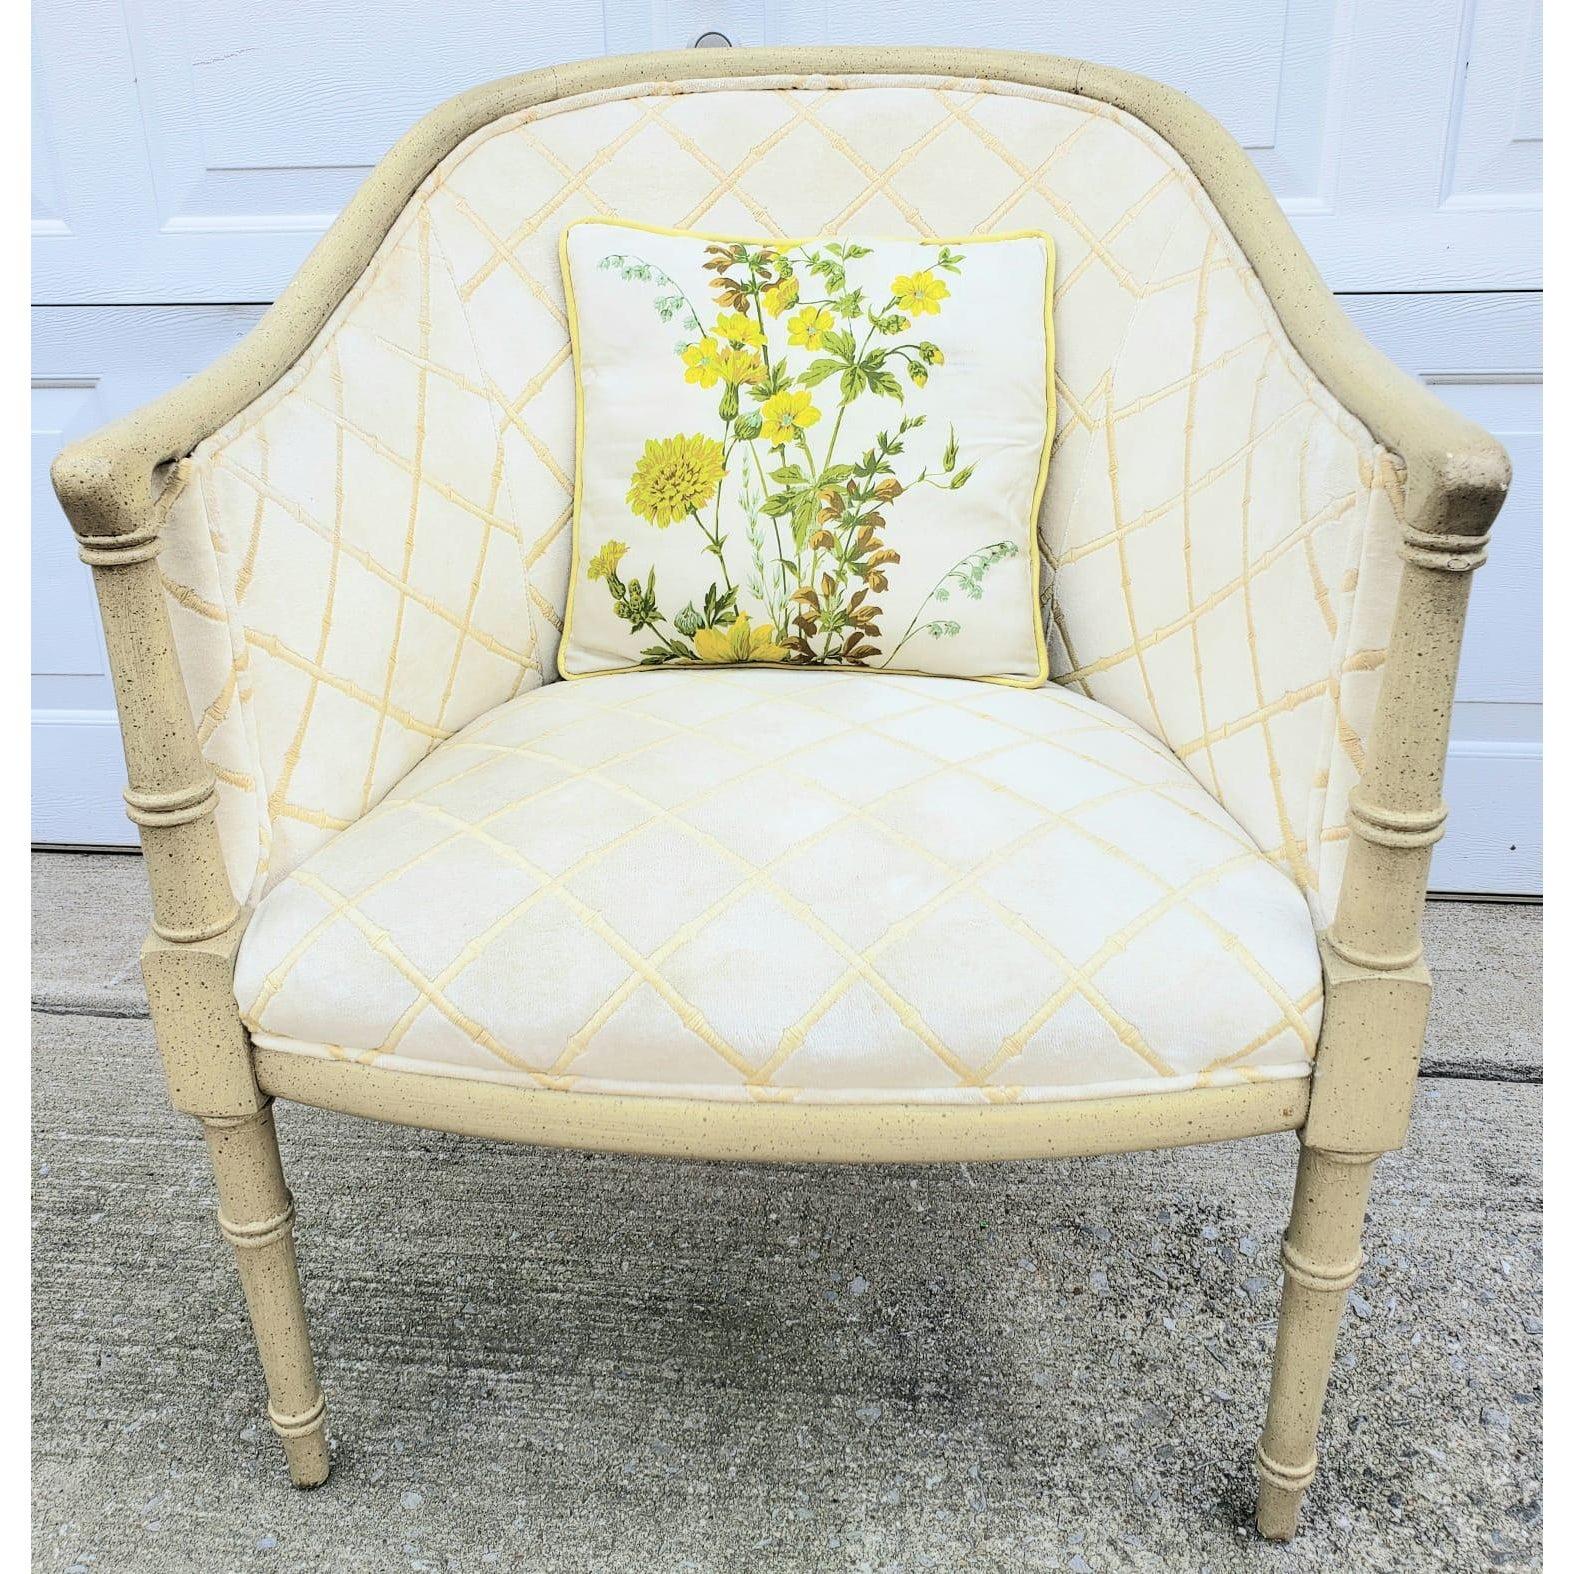 Faux bamboo and velvet upholstery barrel chair. Comes with accent pillow. Velvet Upholstery stitched throughout with bamboo looking stitches.
Measures 25